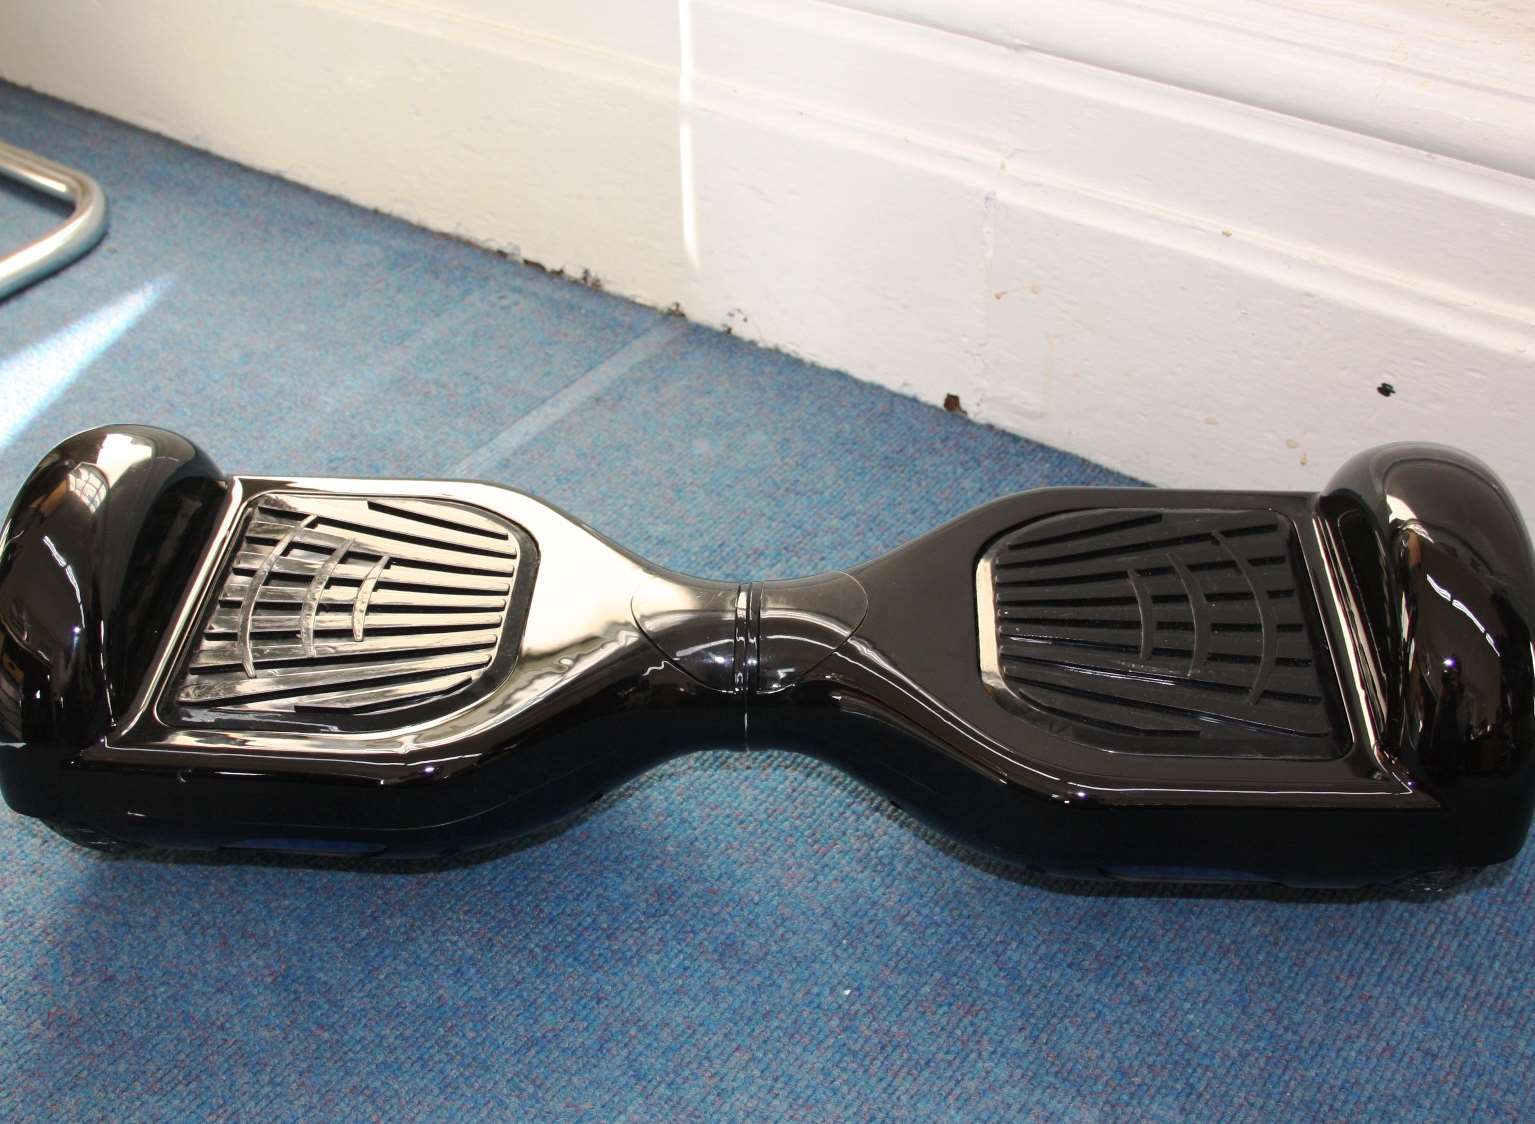 This hoverboard was deemed not fit for sale by KCC